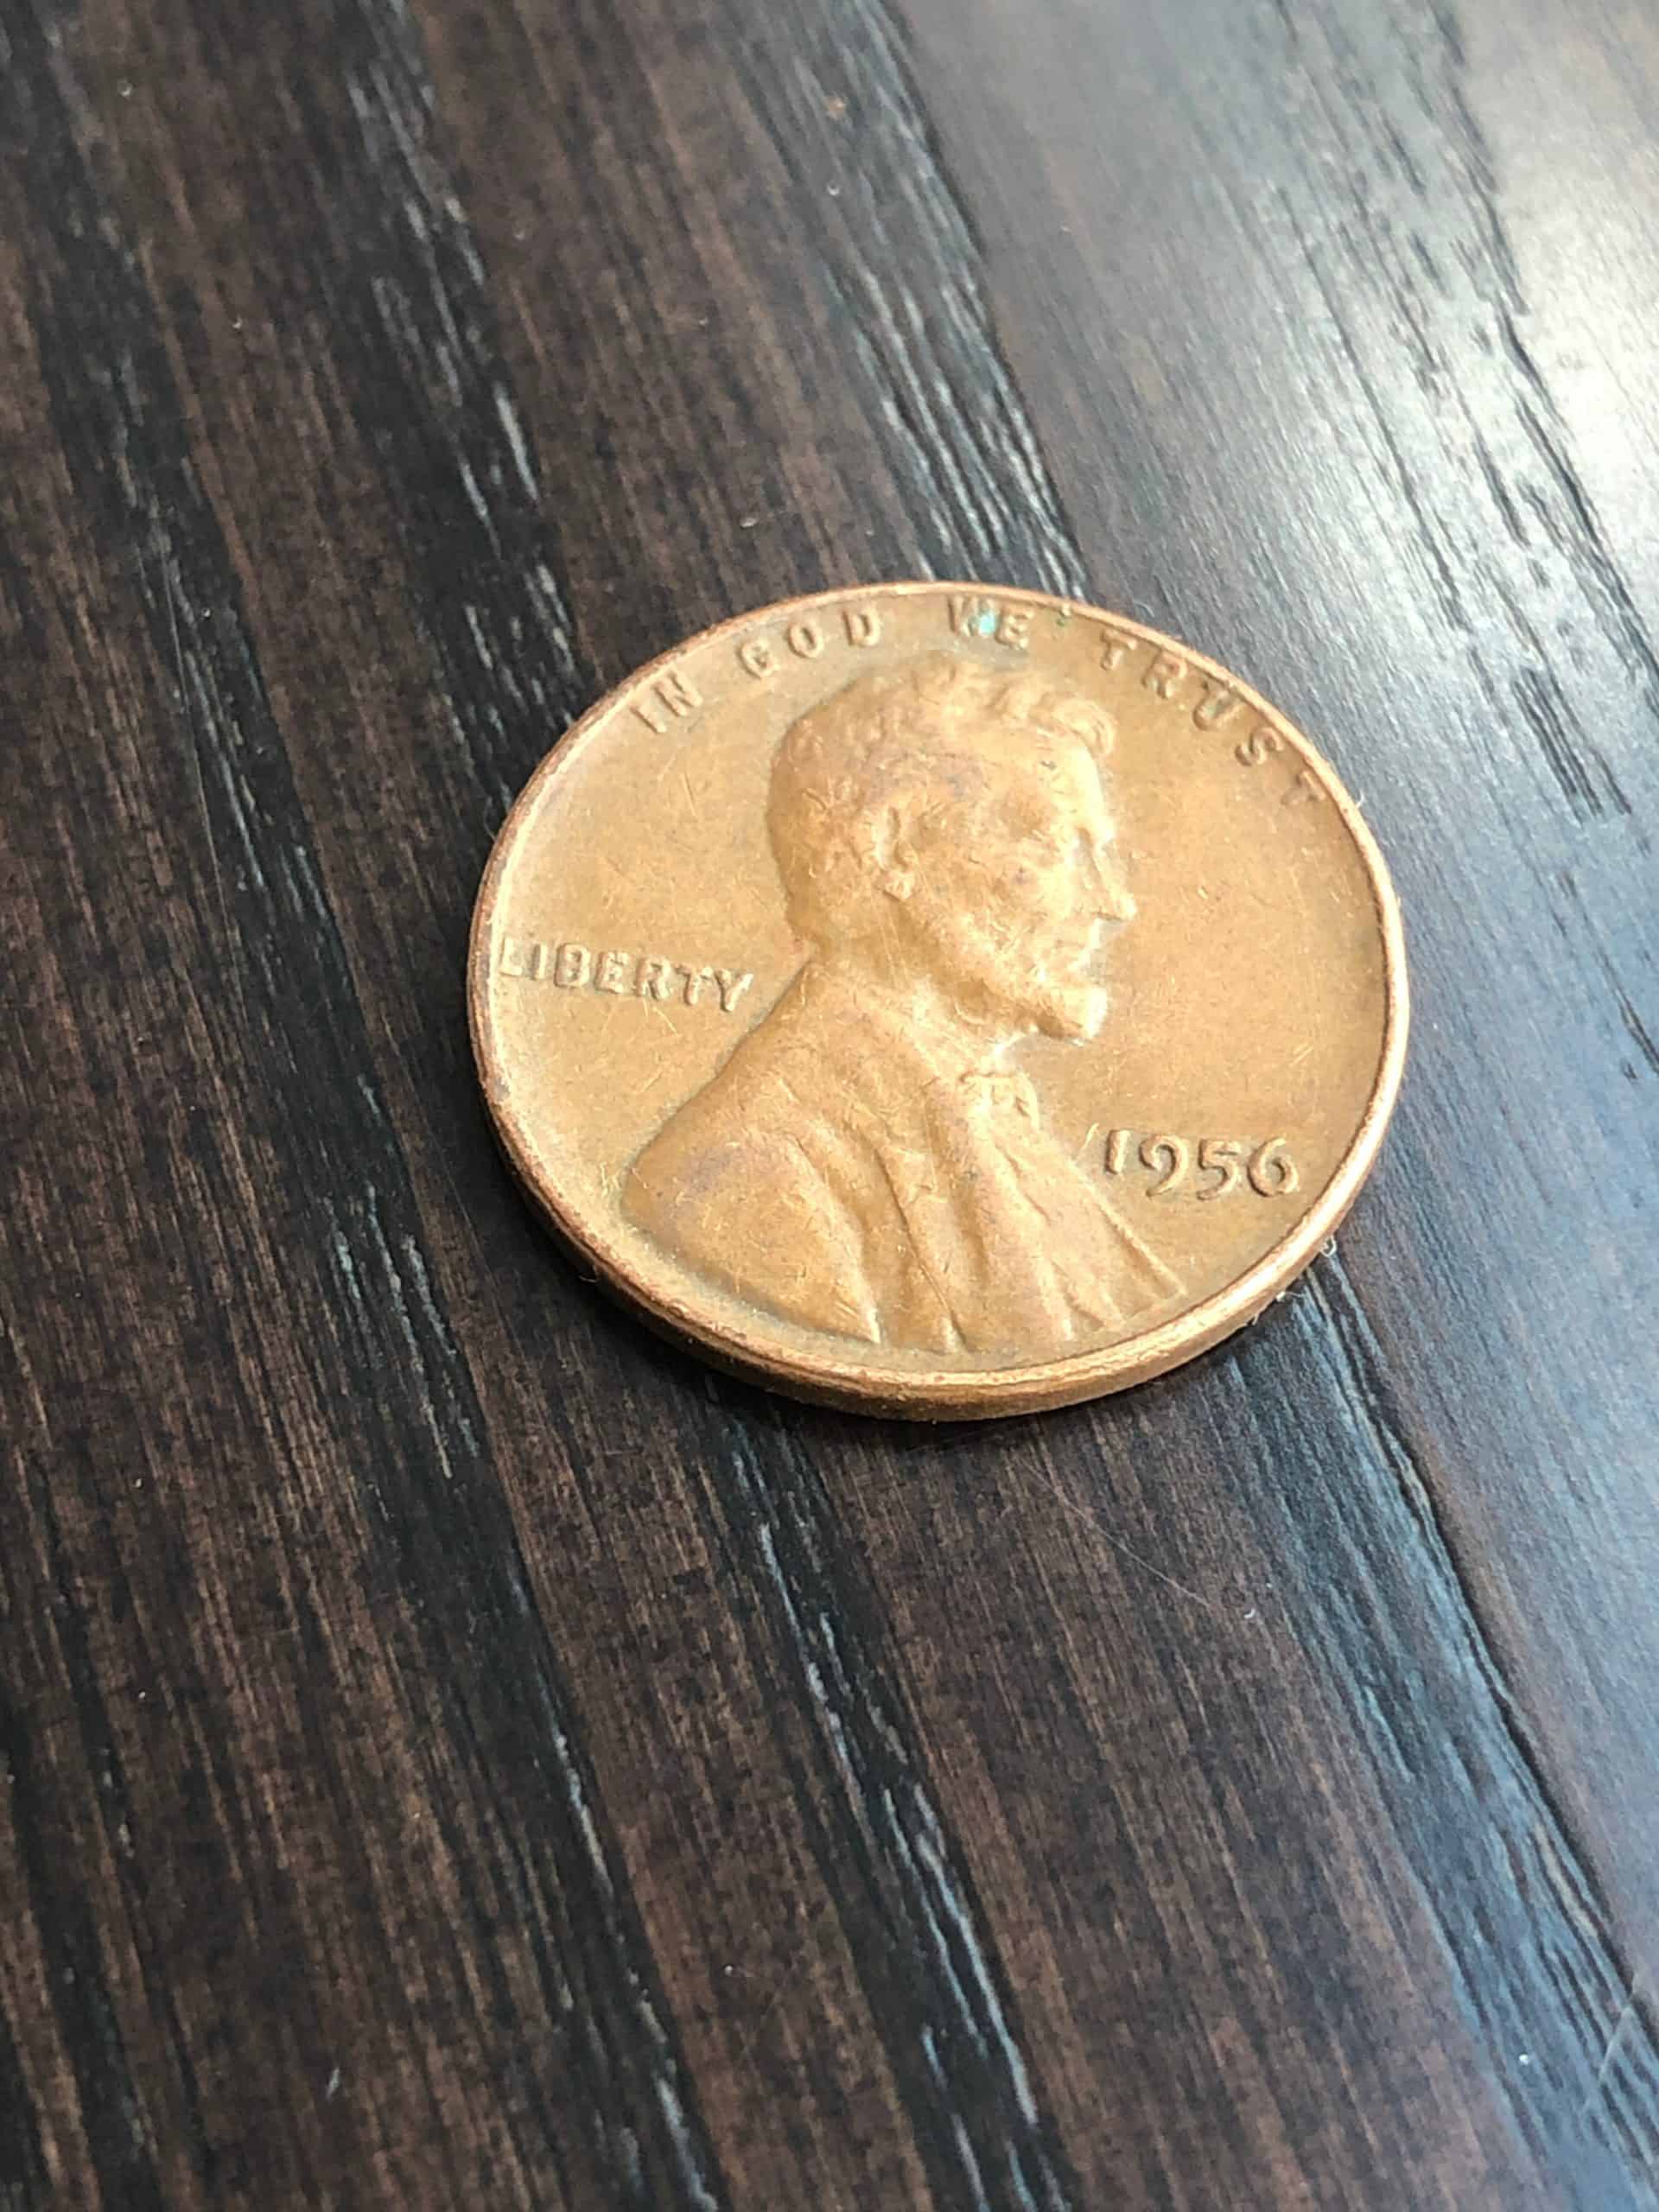 Value of the 1956 Lincoln penny